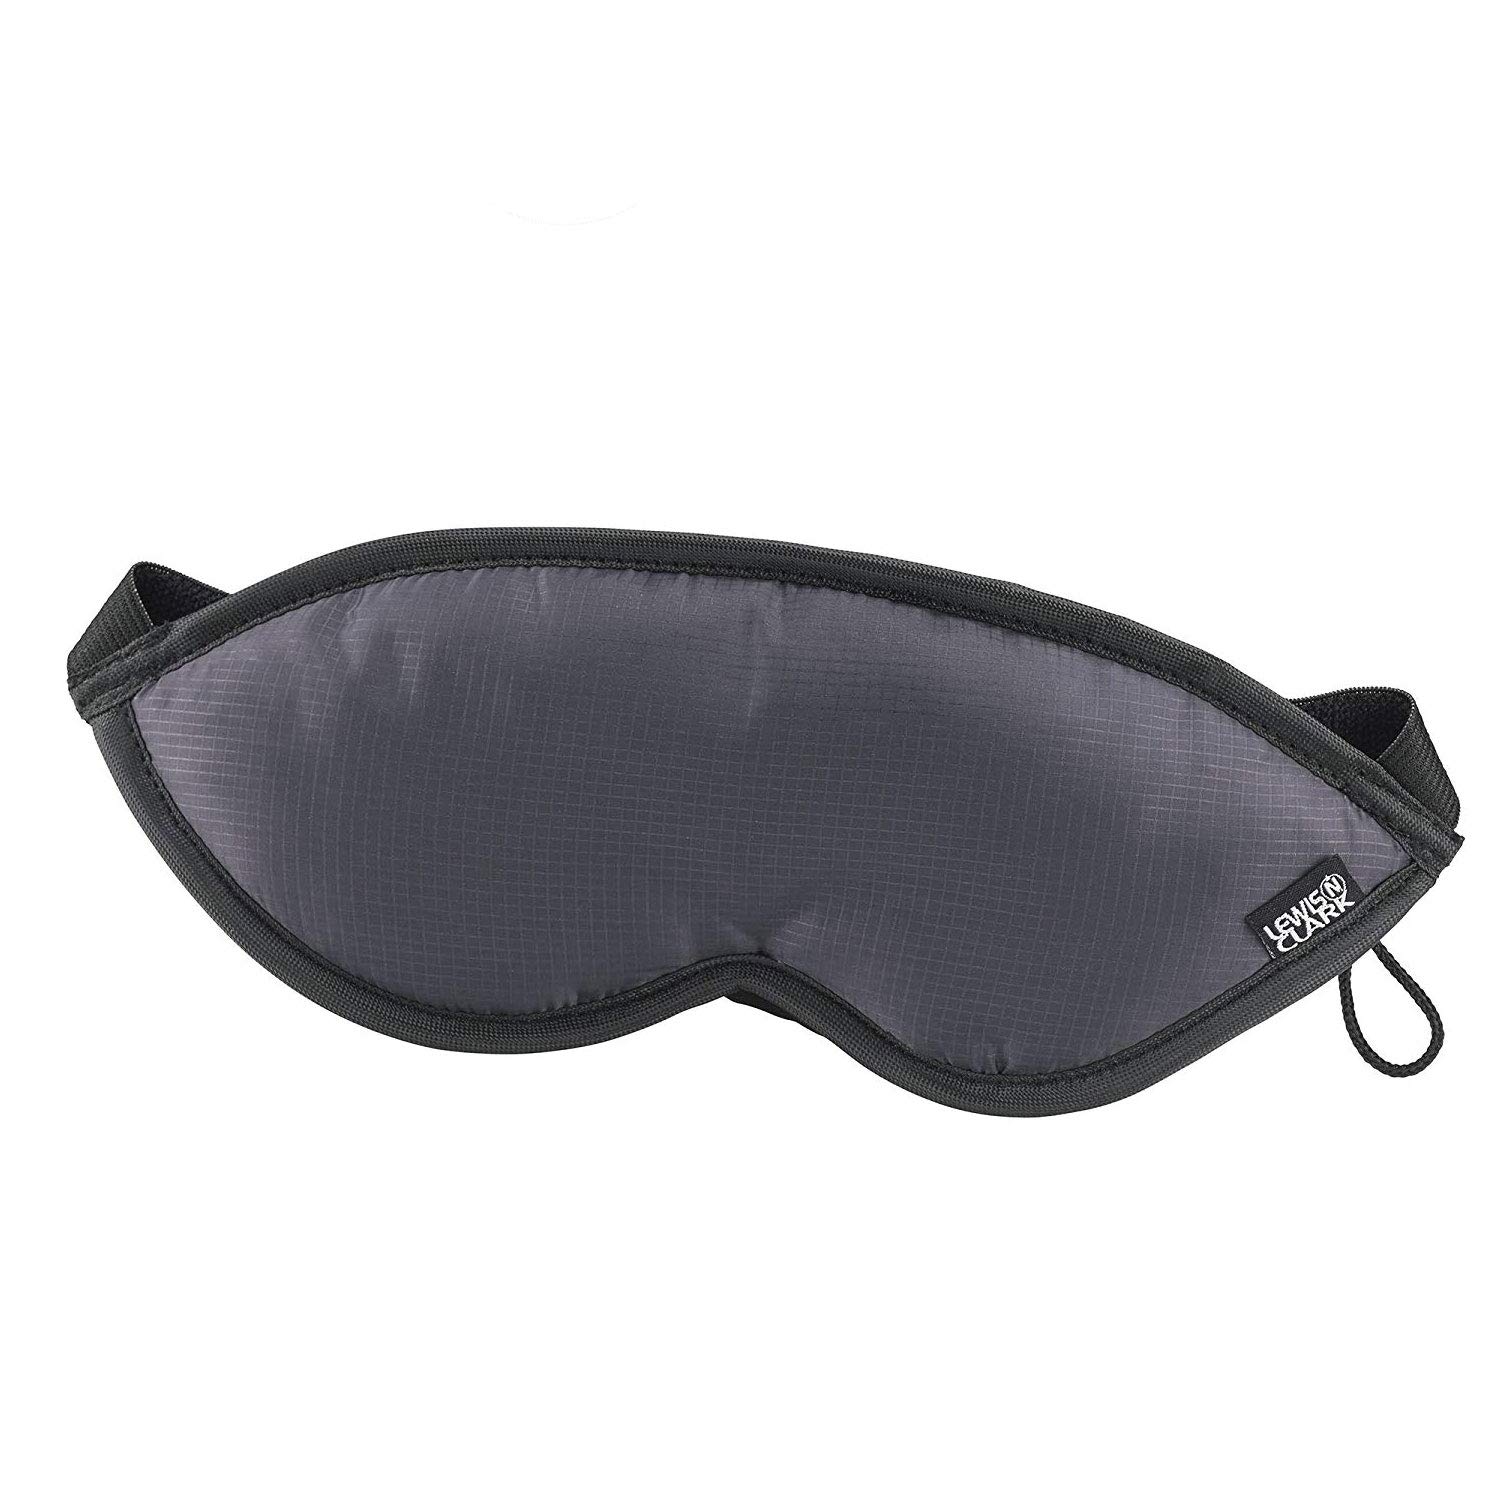 Lewis N. Clark Comfort Eye Mask + Sleep Aid to Block Light for Travel, Airplane, Hotel, Airport, Insomnia + Headache Relief with Adjustable Straps, Gray